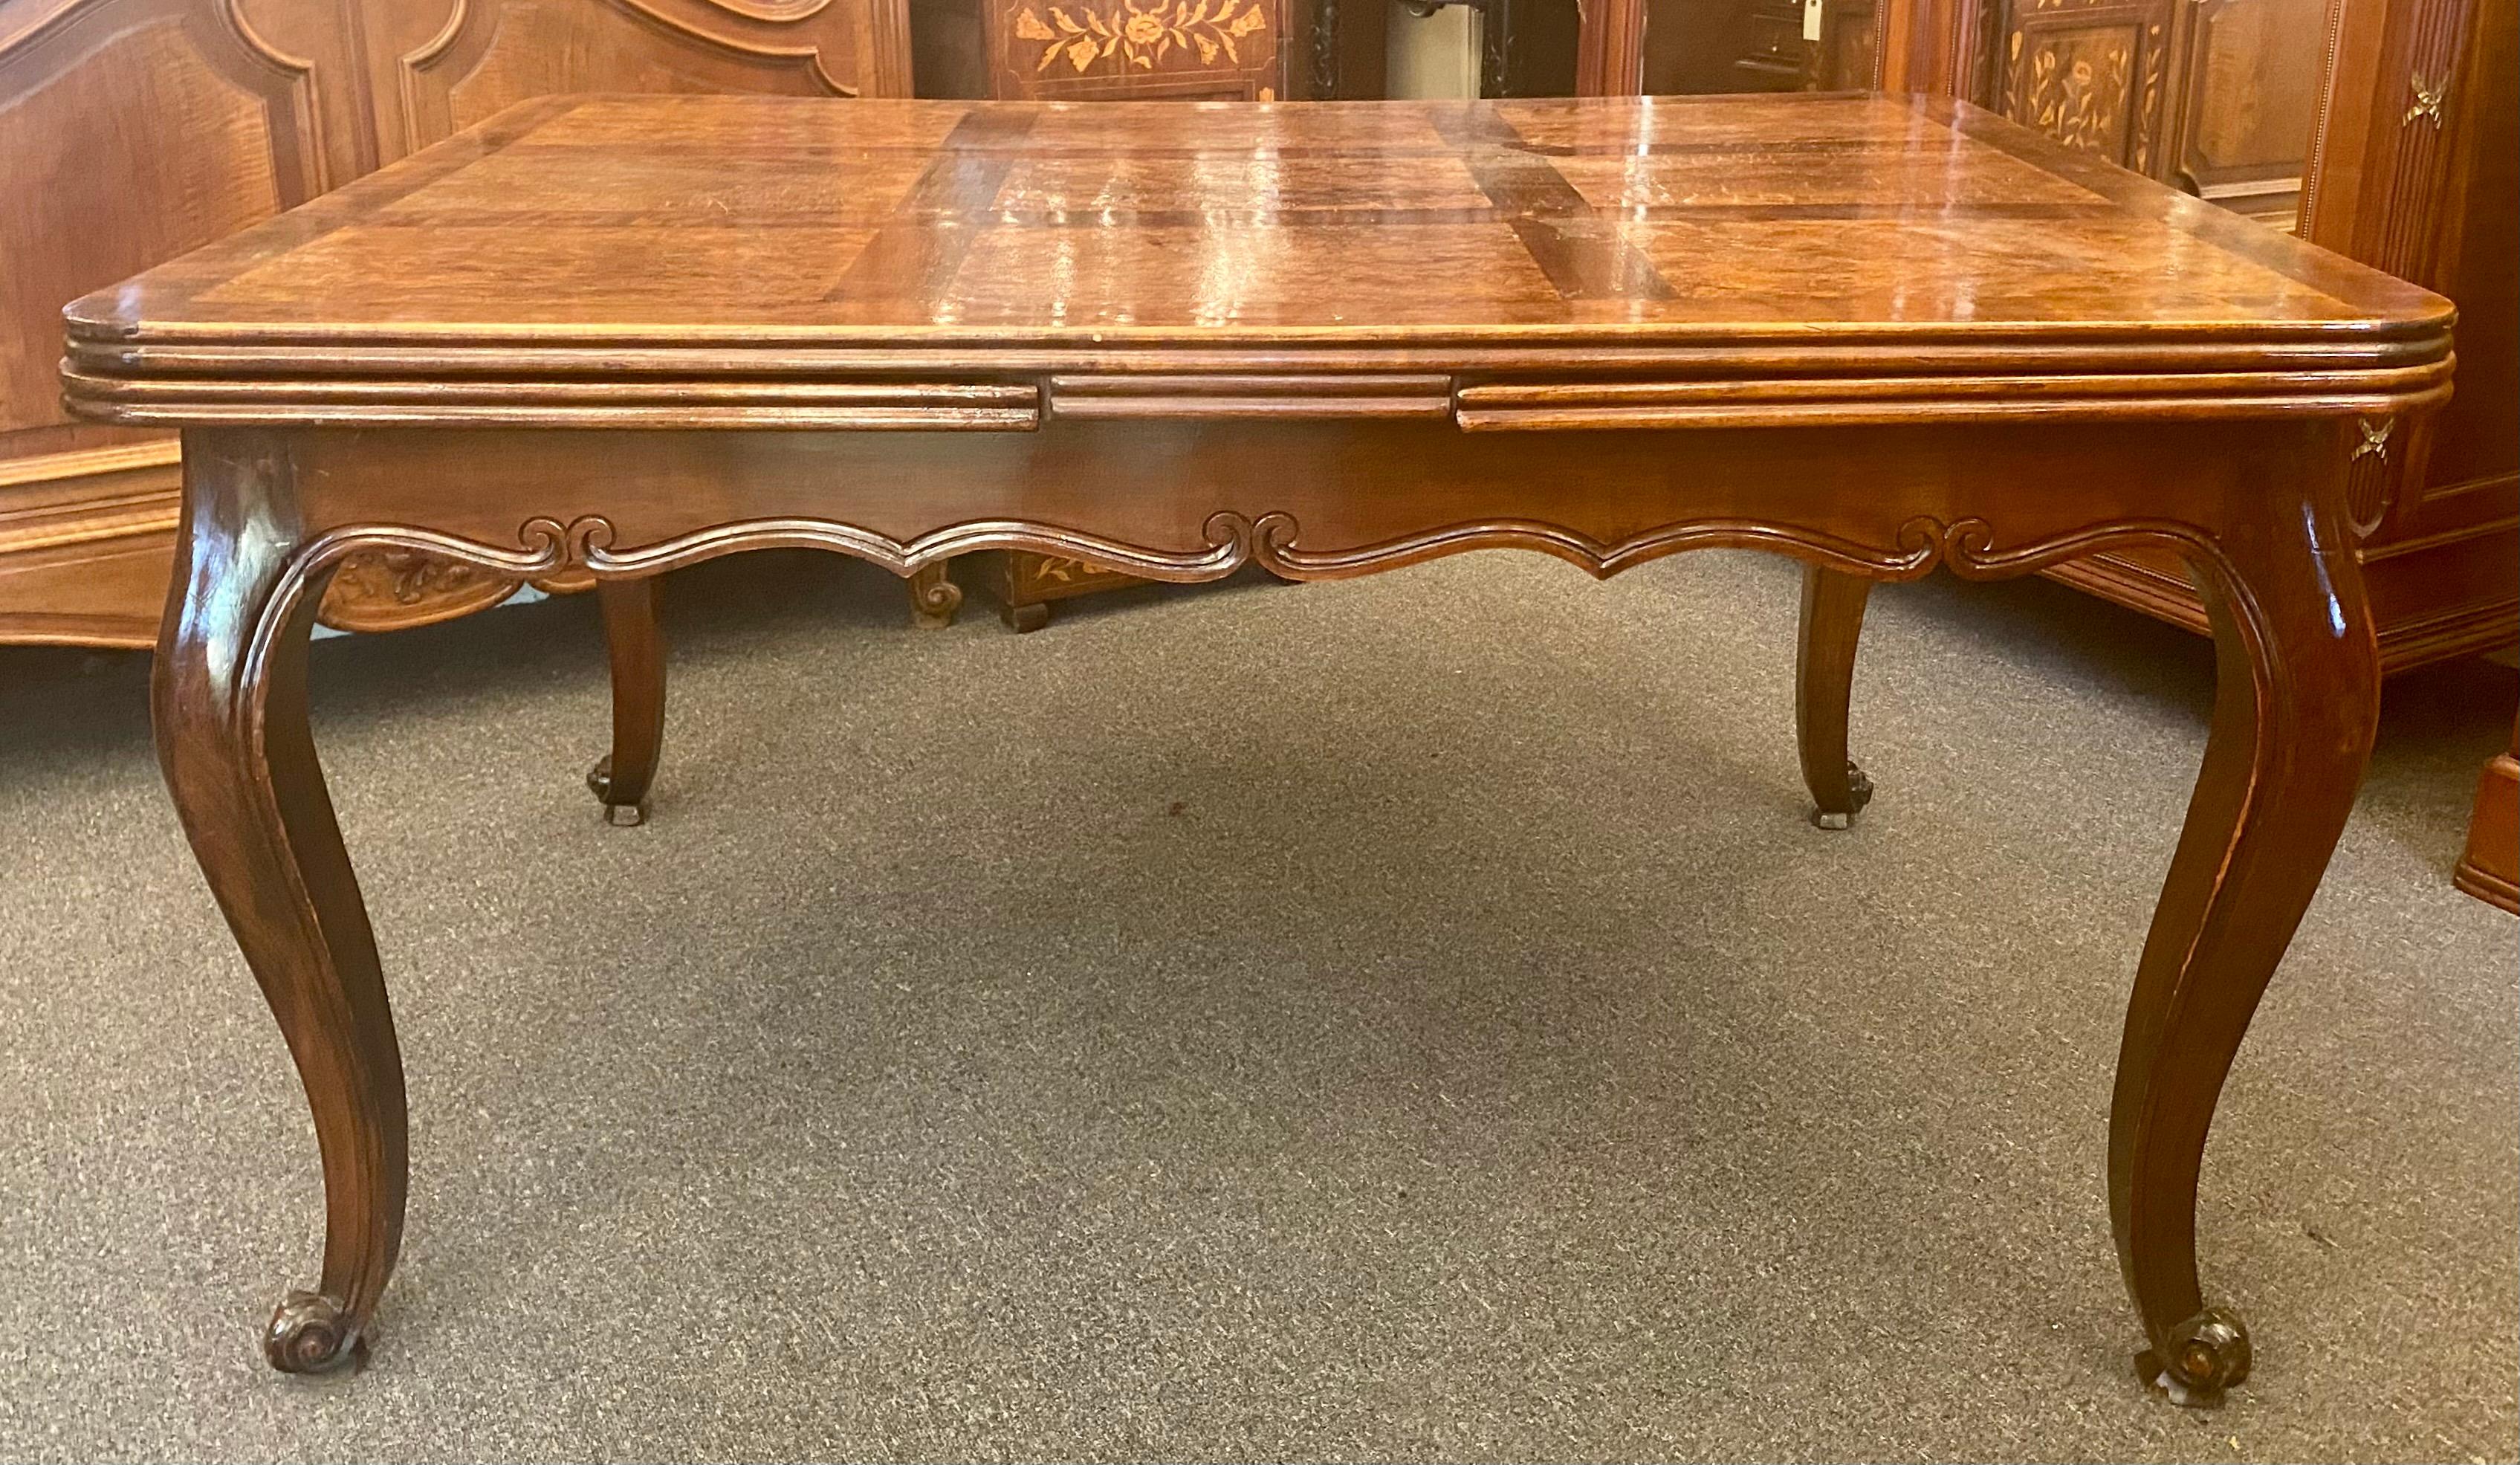 Antique French burled walnut pull-out dining table with fine elm inlay top, circa 1900.
Measures: 55